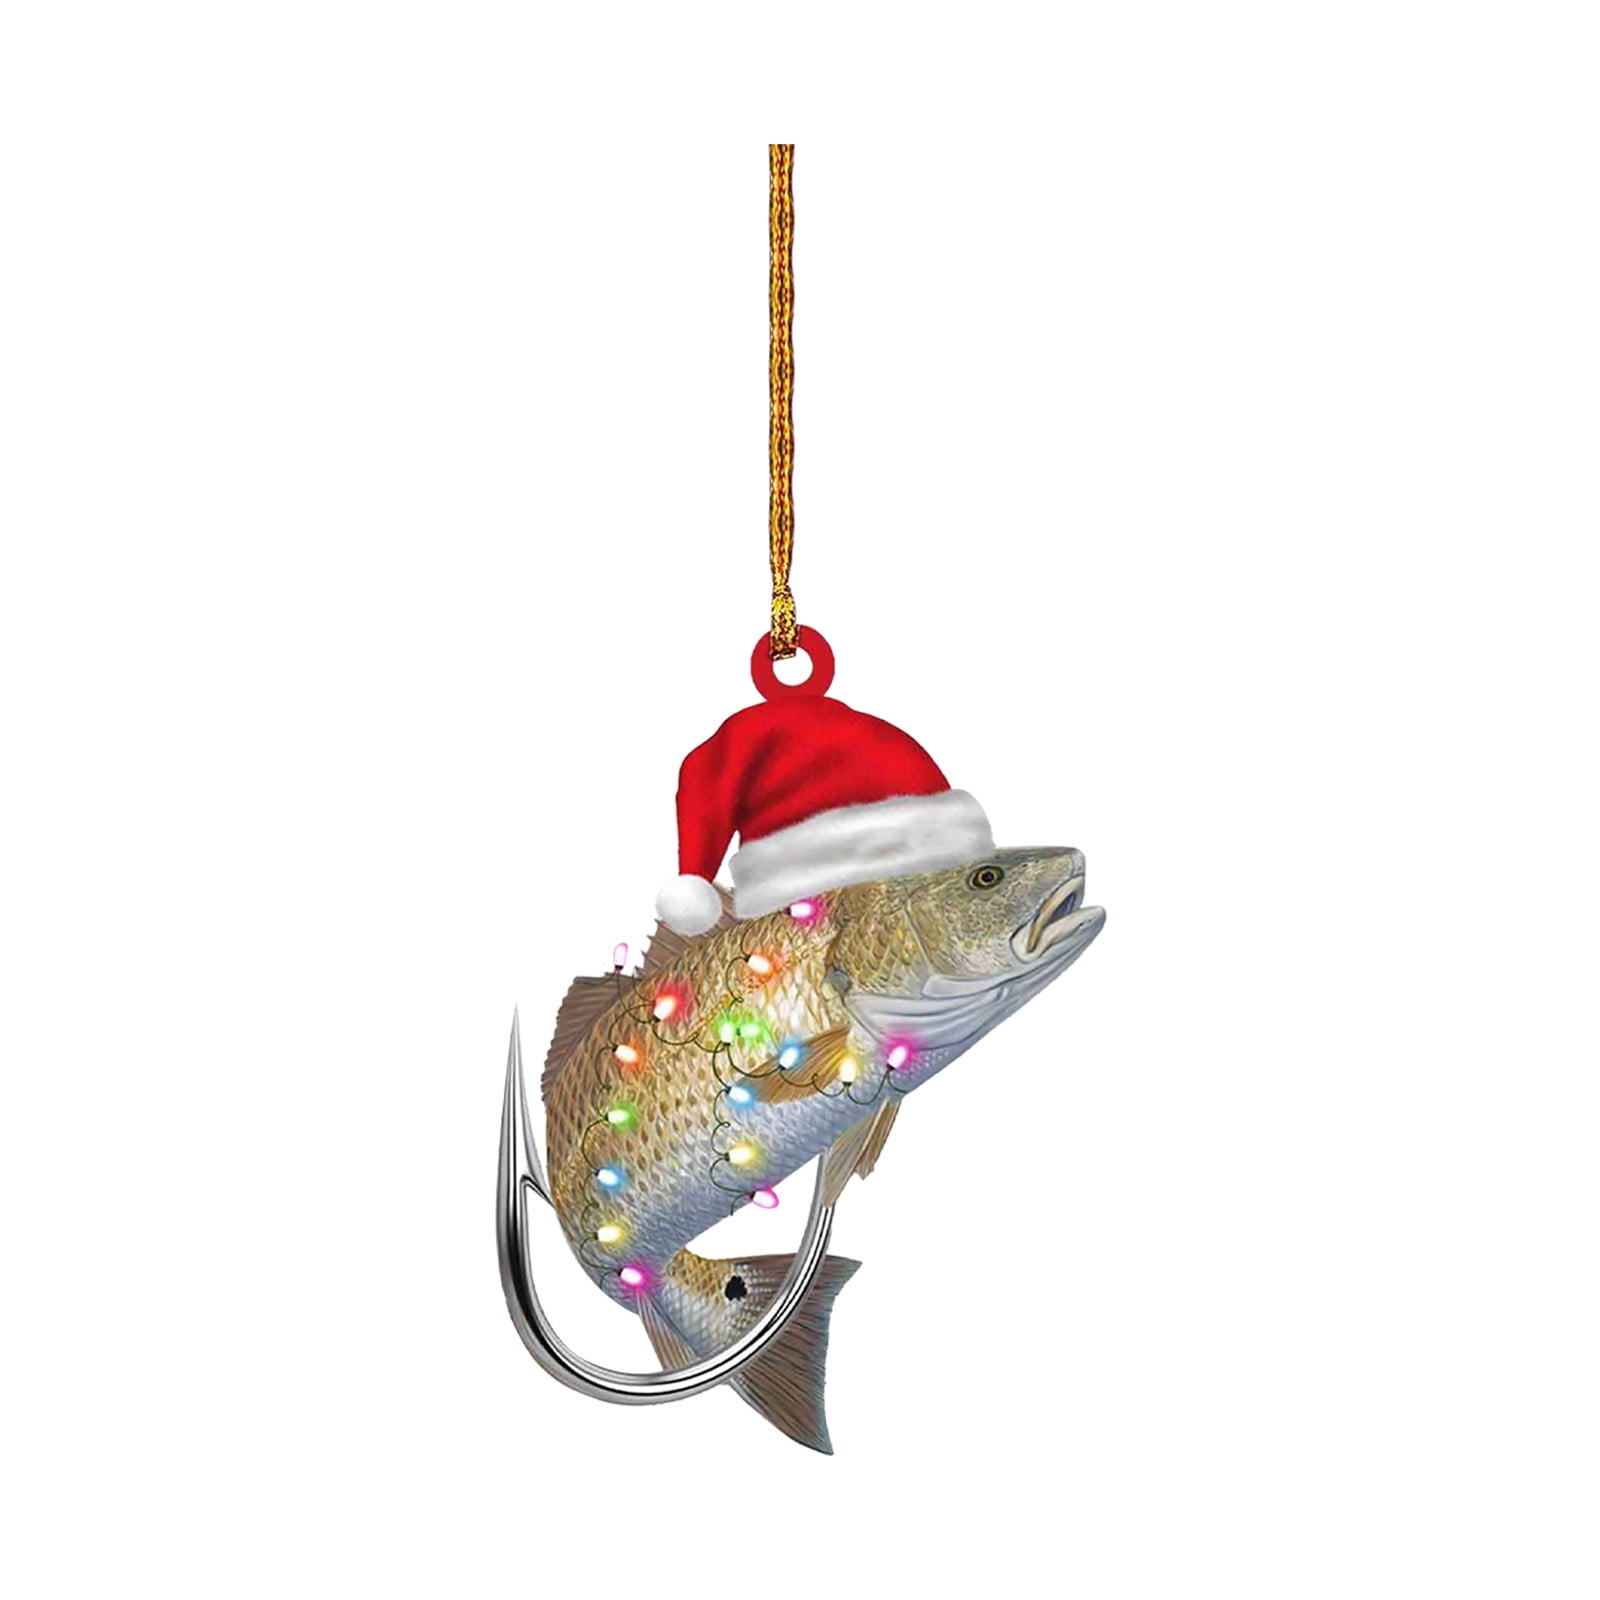 Stain Glass Window Kits for Adults Personalized Green Bass Fish Largemouth  Flat 2D Christmas Ornaments Tree Decorations Stain Glass Bath Mom Ornament  Hummingbird Ball Ornament Set Giveaway of The Day 